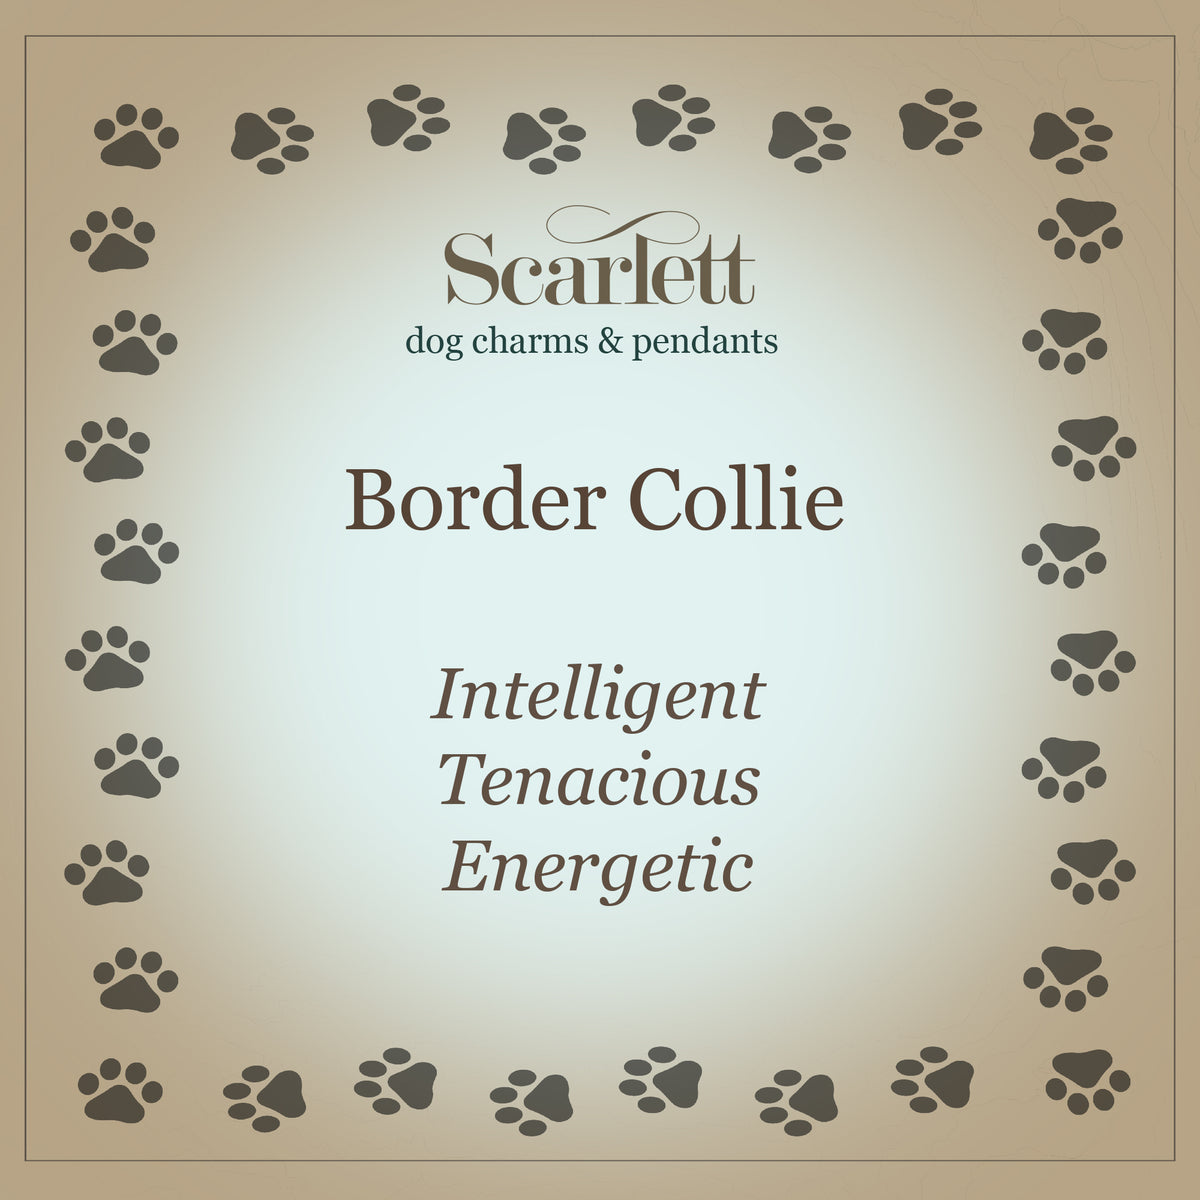 meaning card border collie personality silver dog charms scarlett jewellery